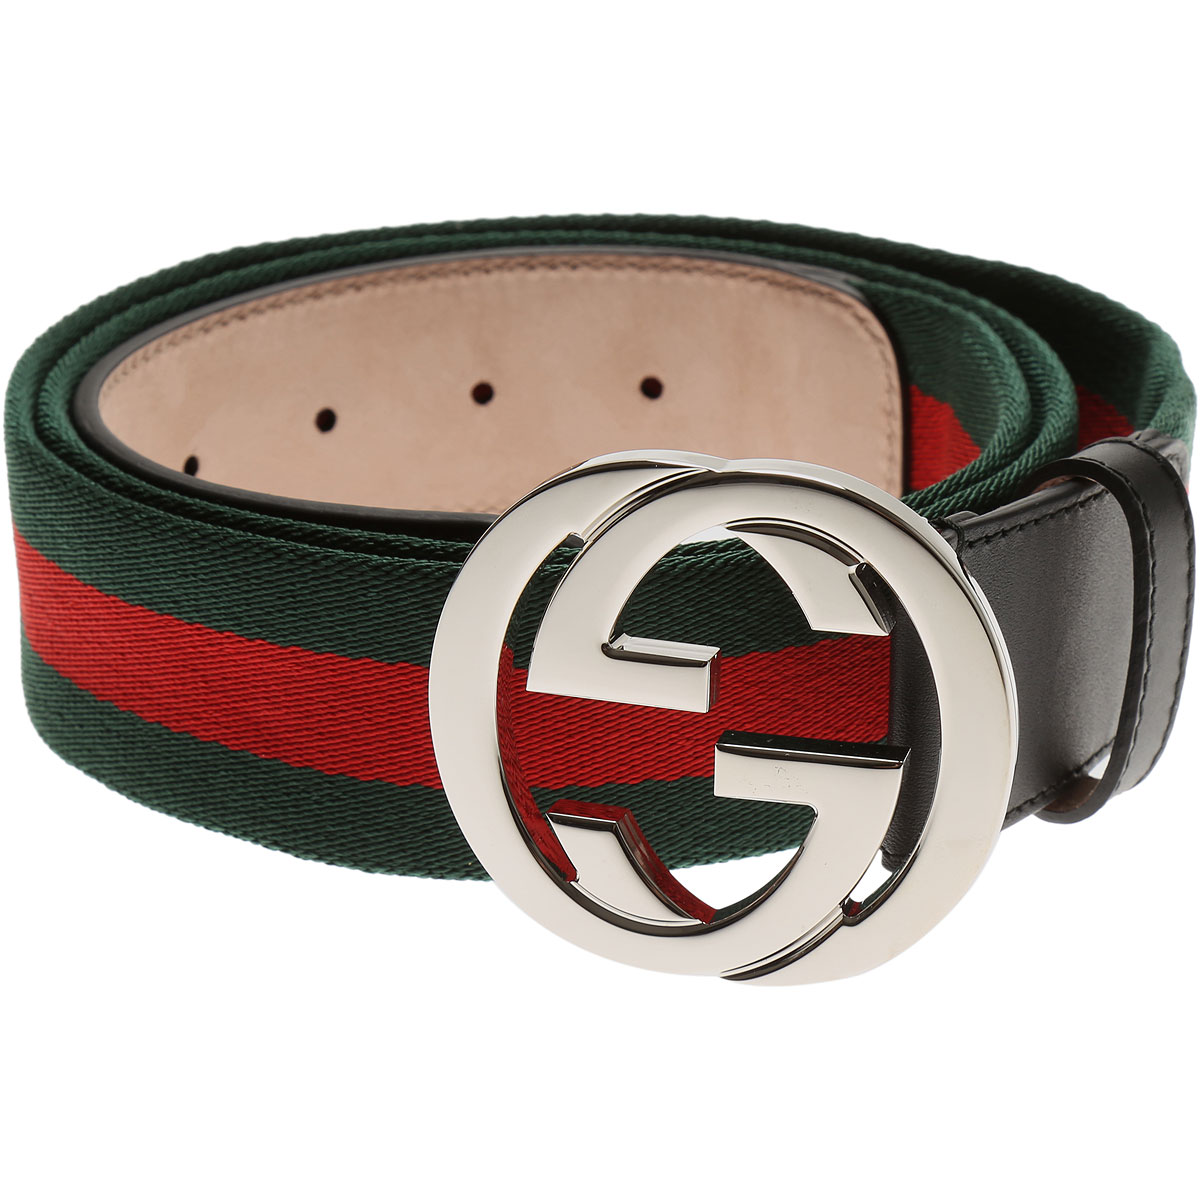 Mens Belts Gucci, Style code: 411924-h917n-1060